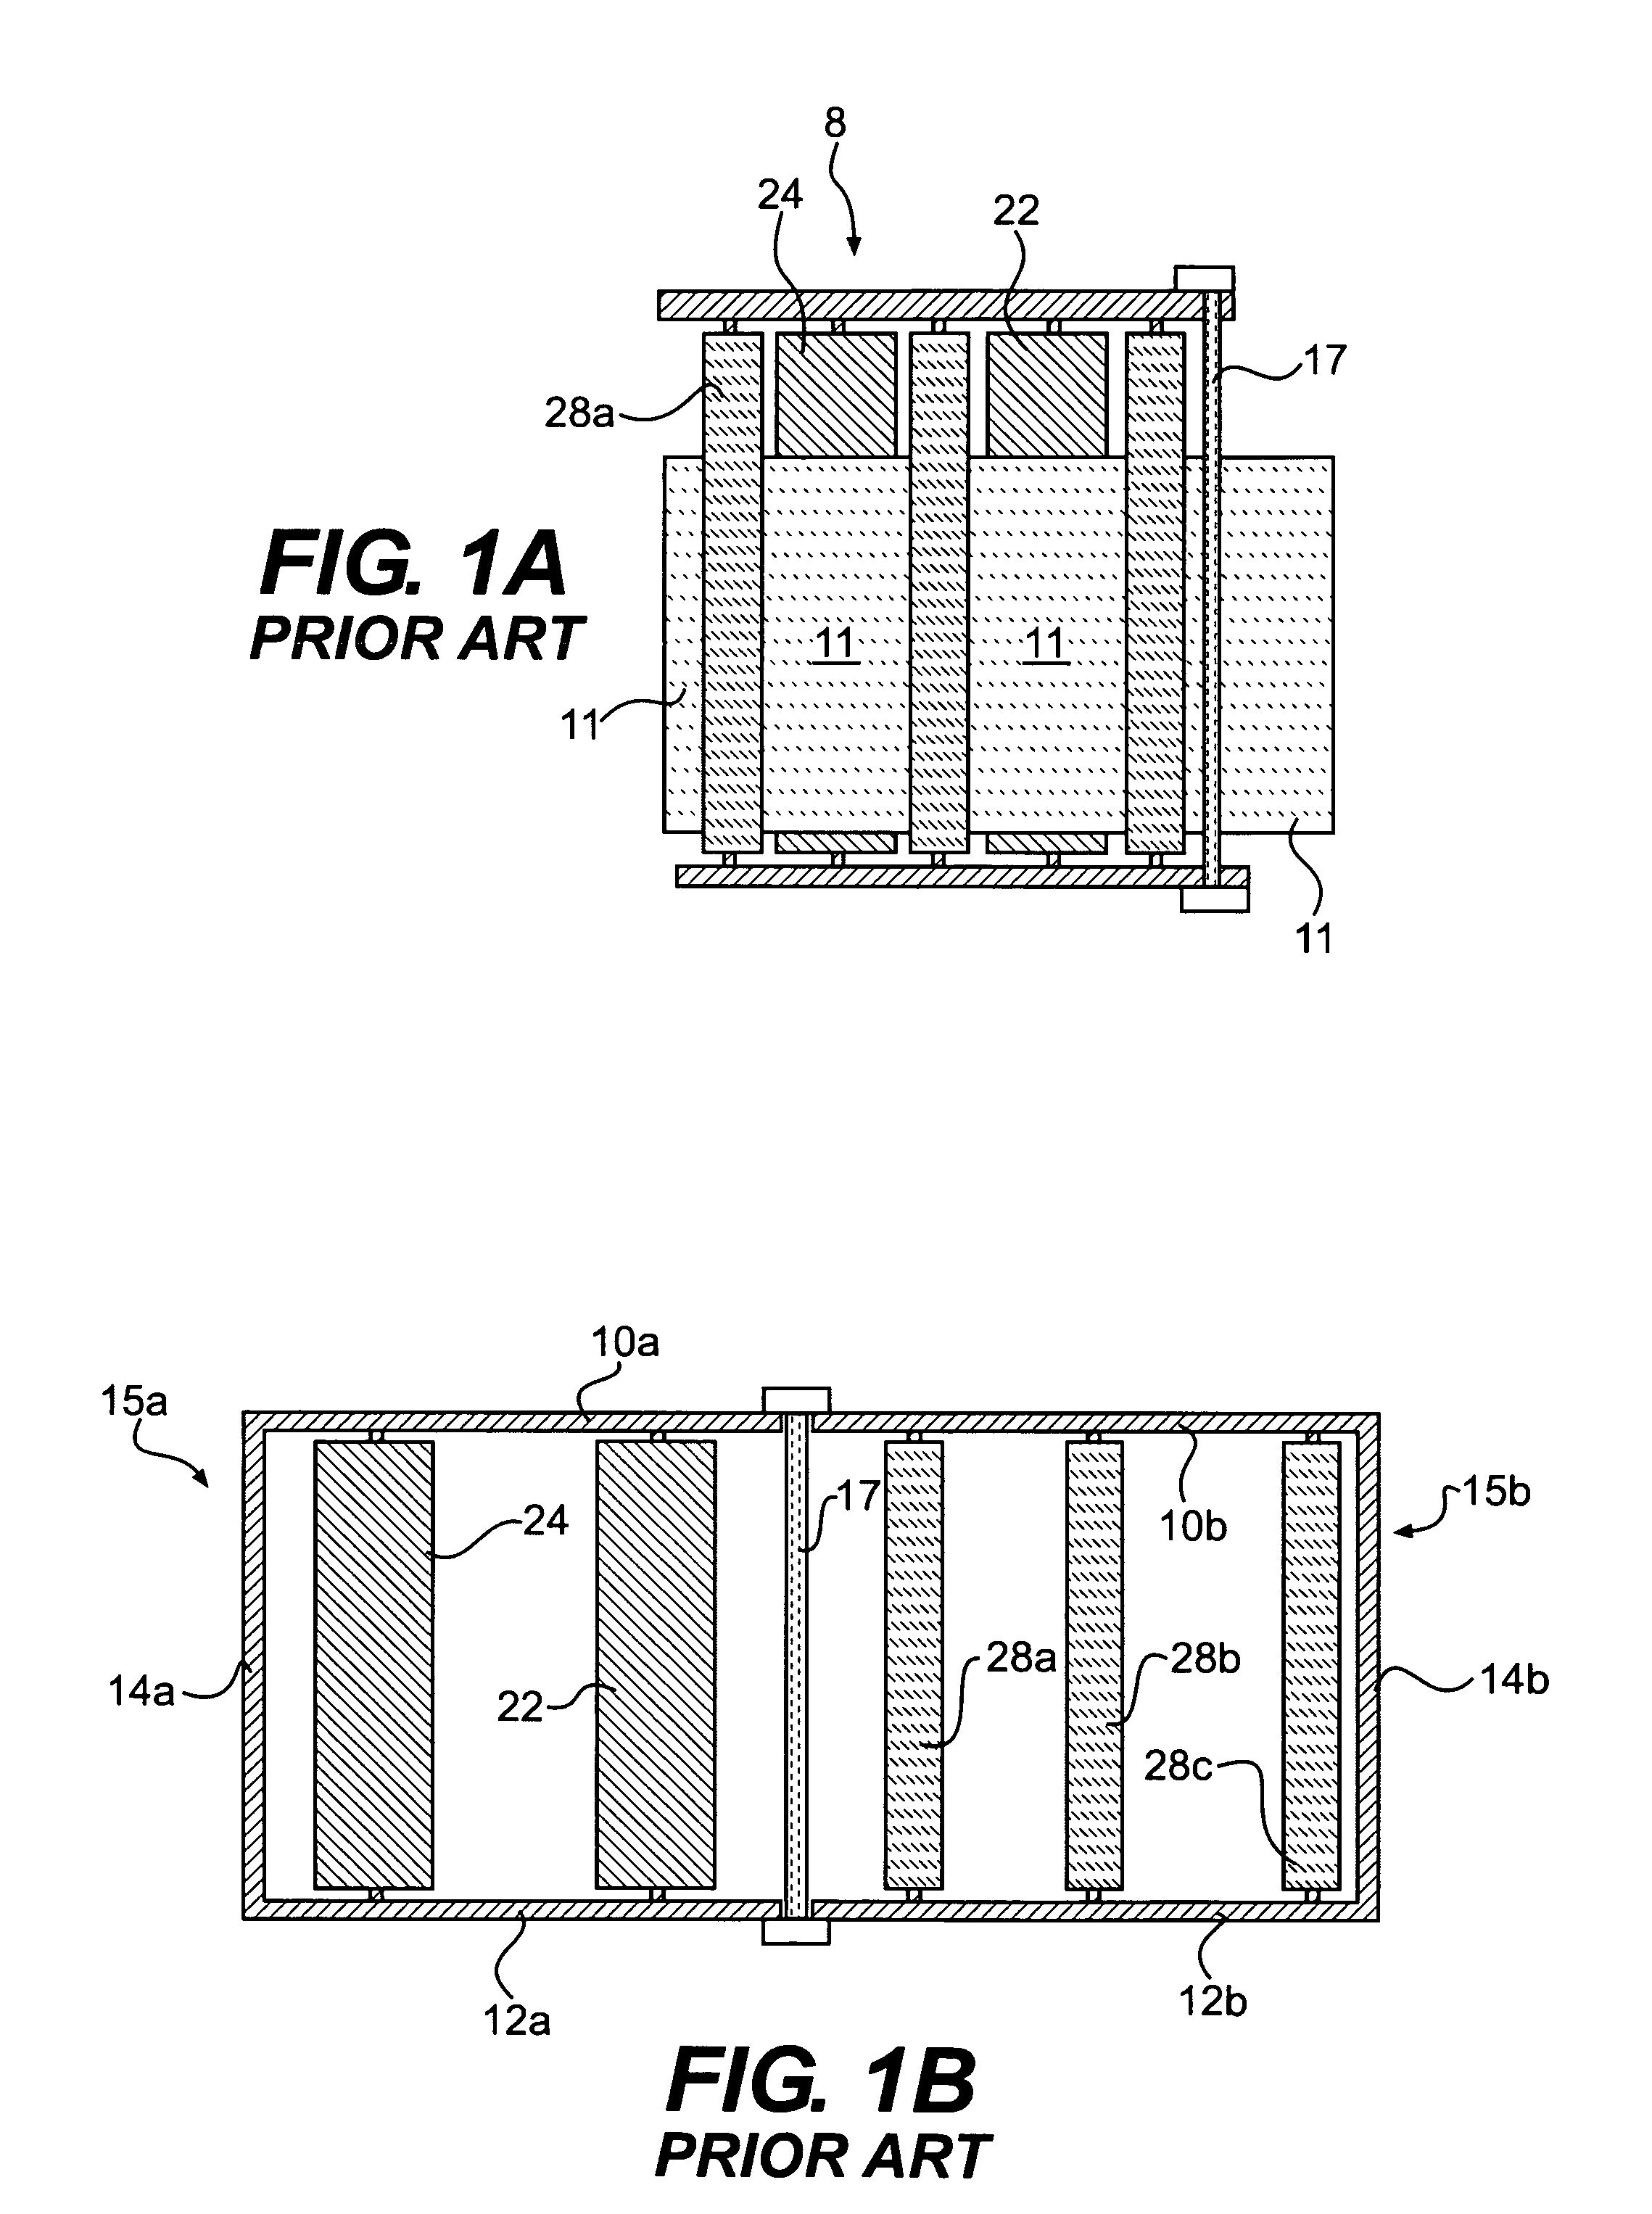 Film dispenser with pre-stretch assembly